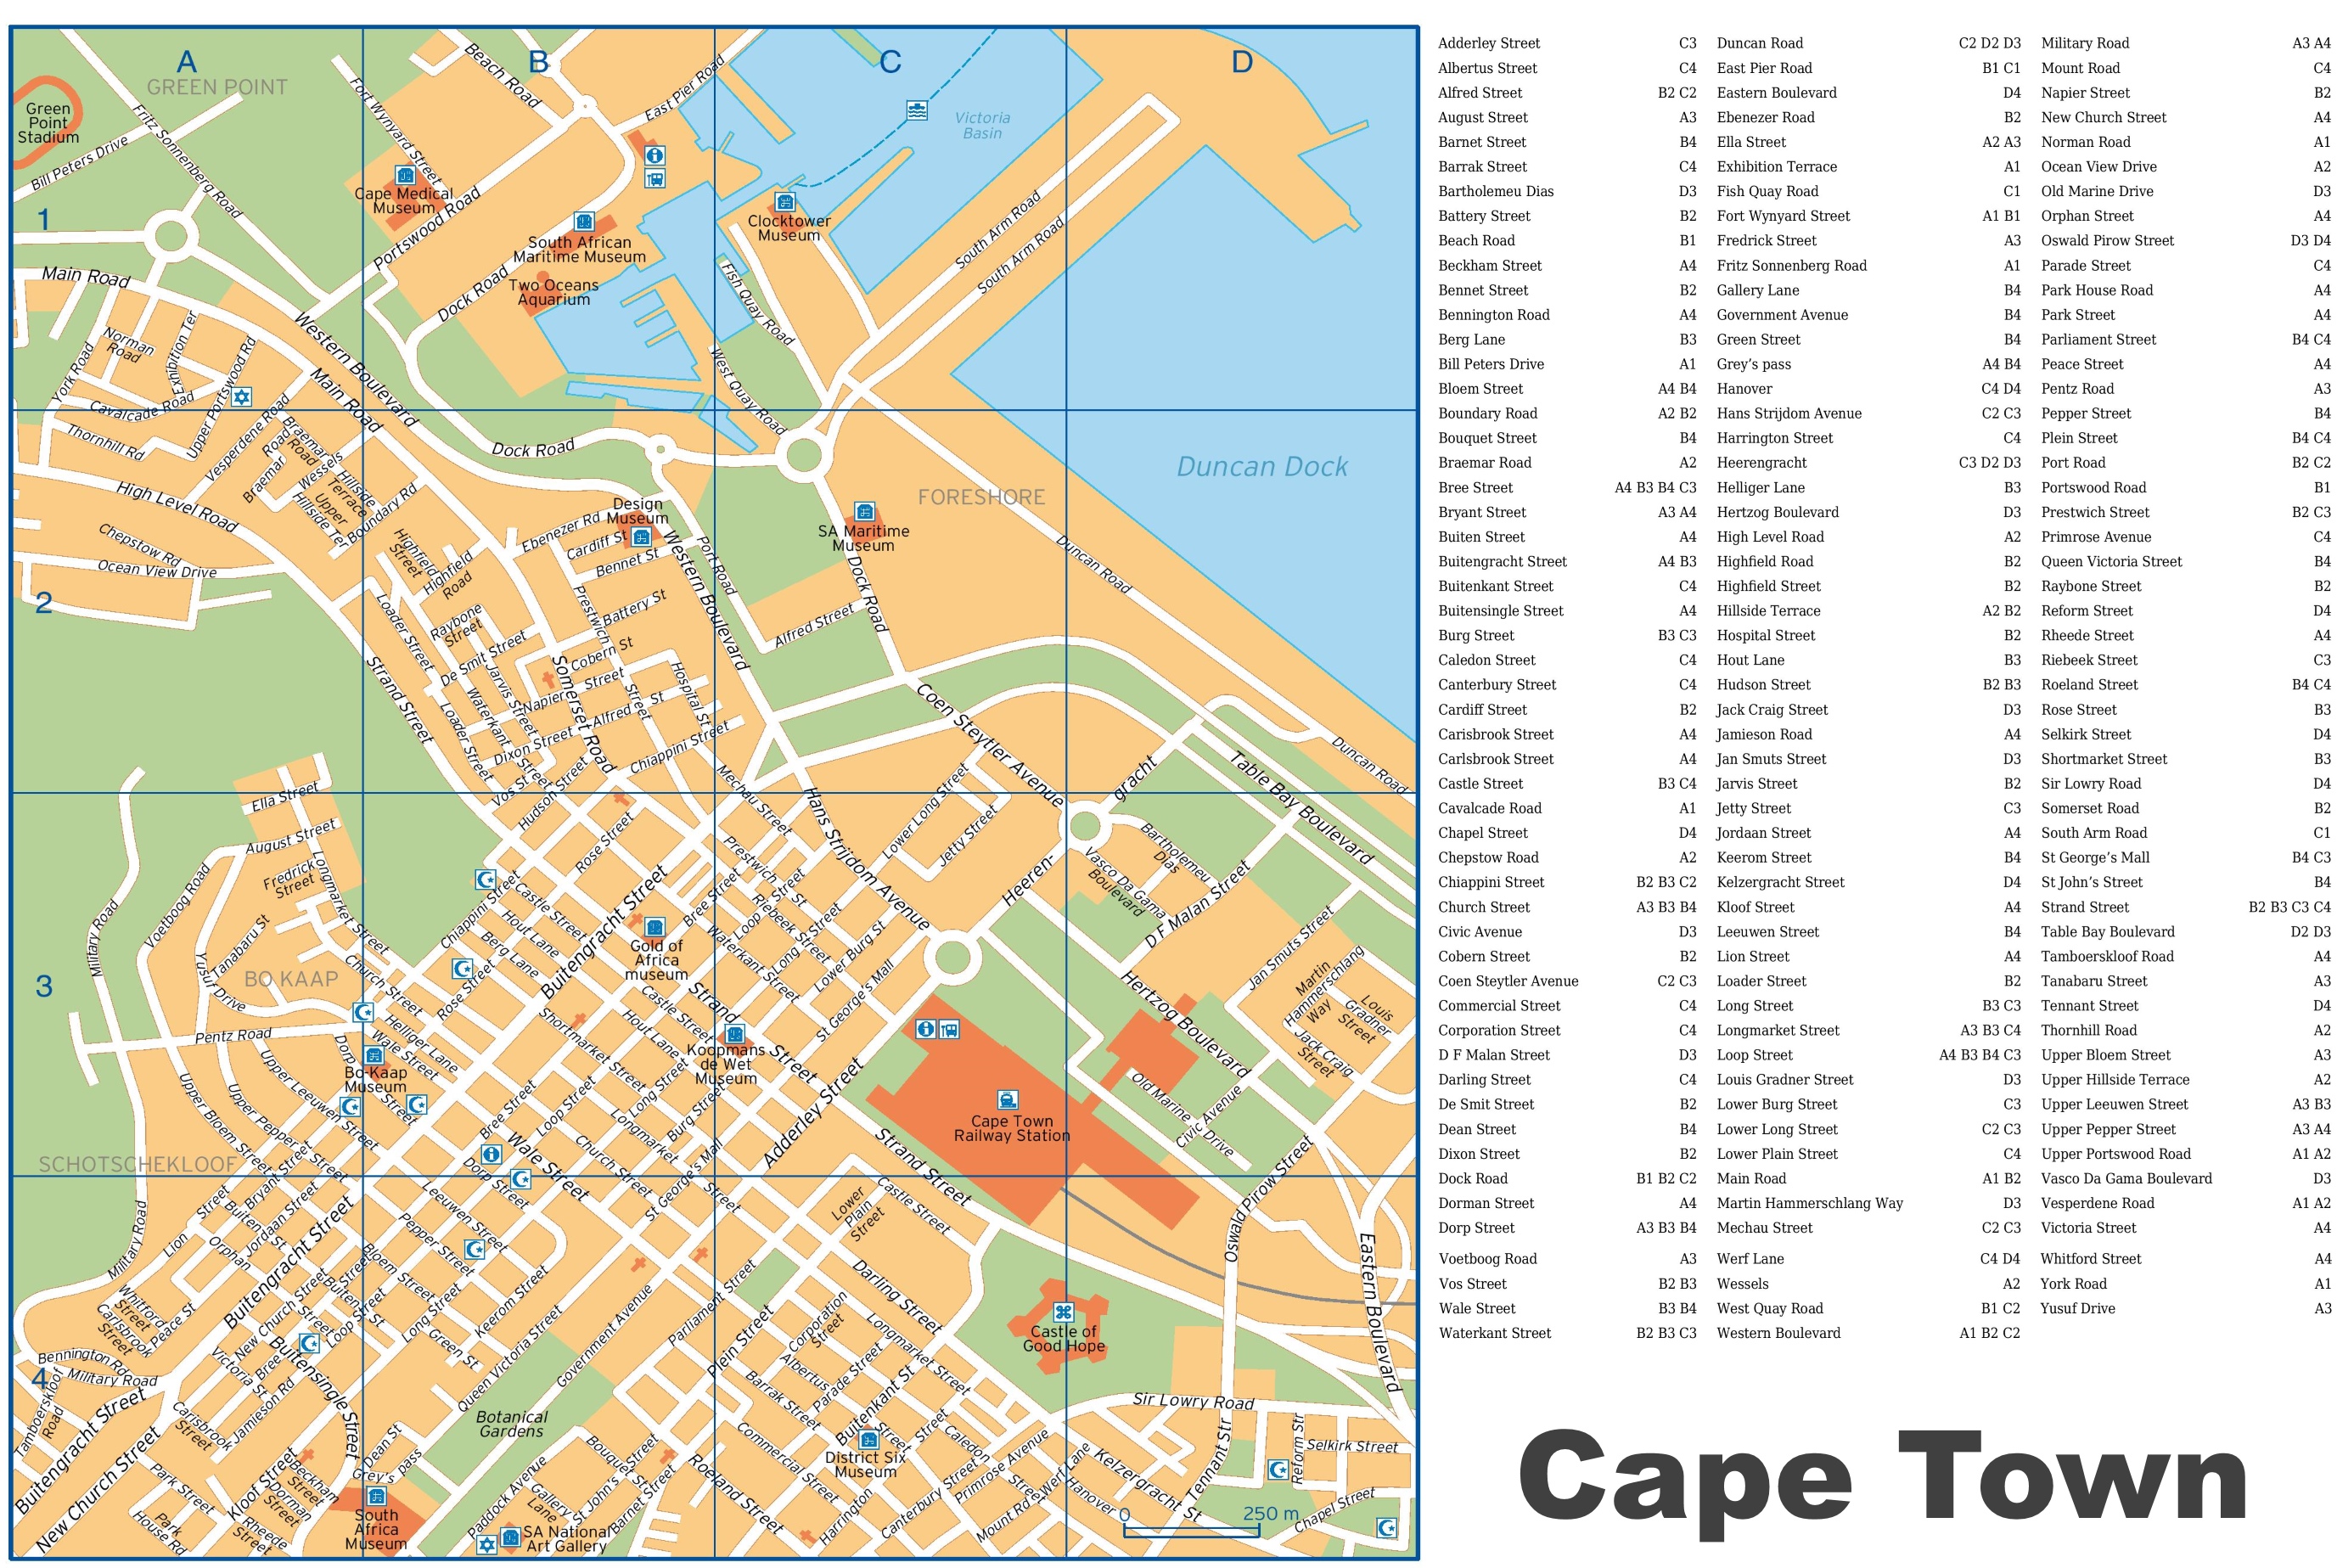 Cape Town In World Map - vrogue.co